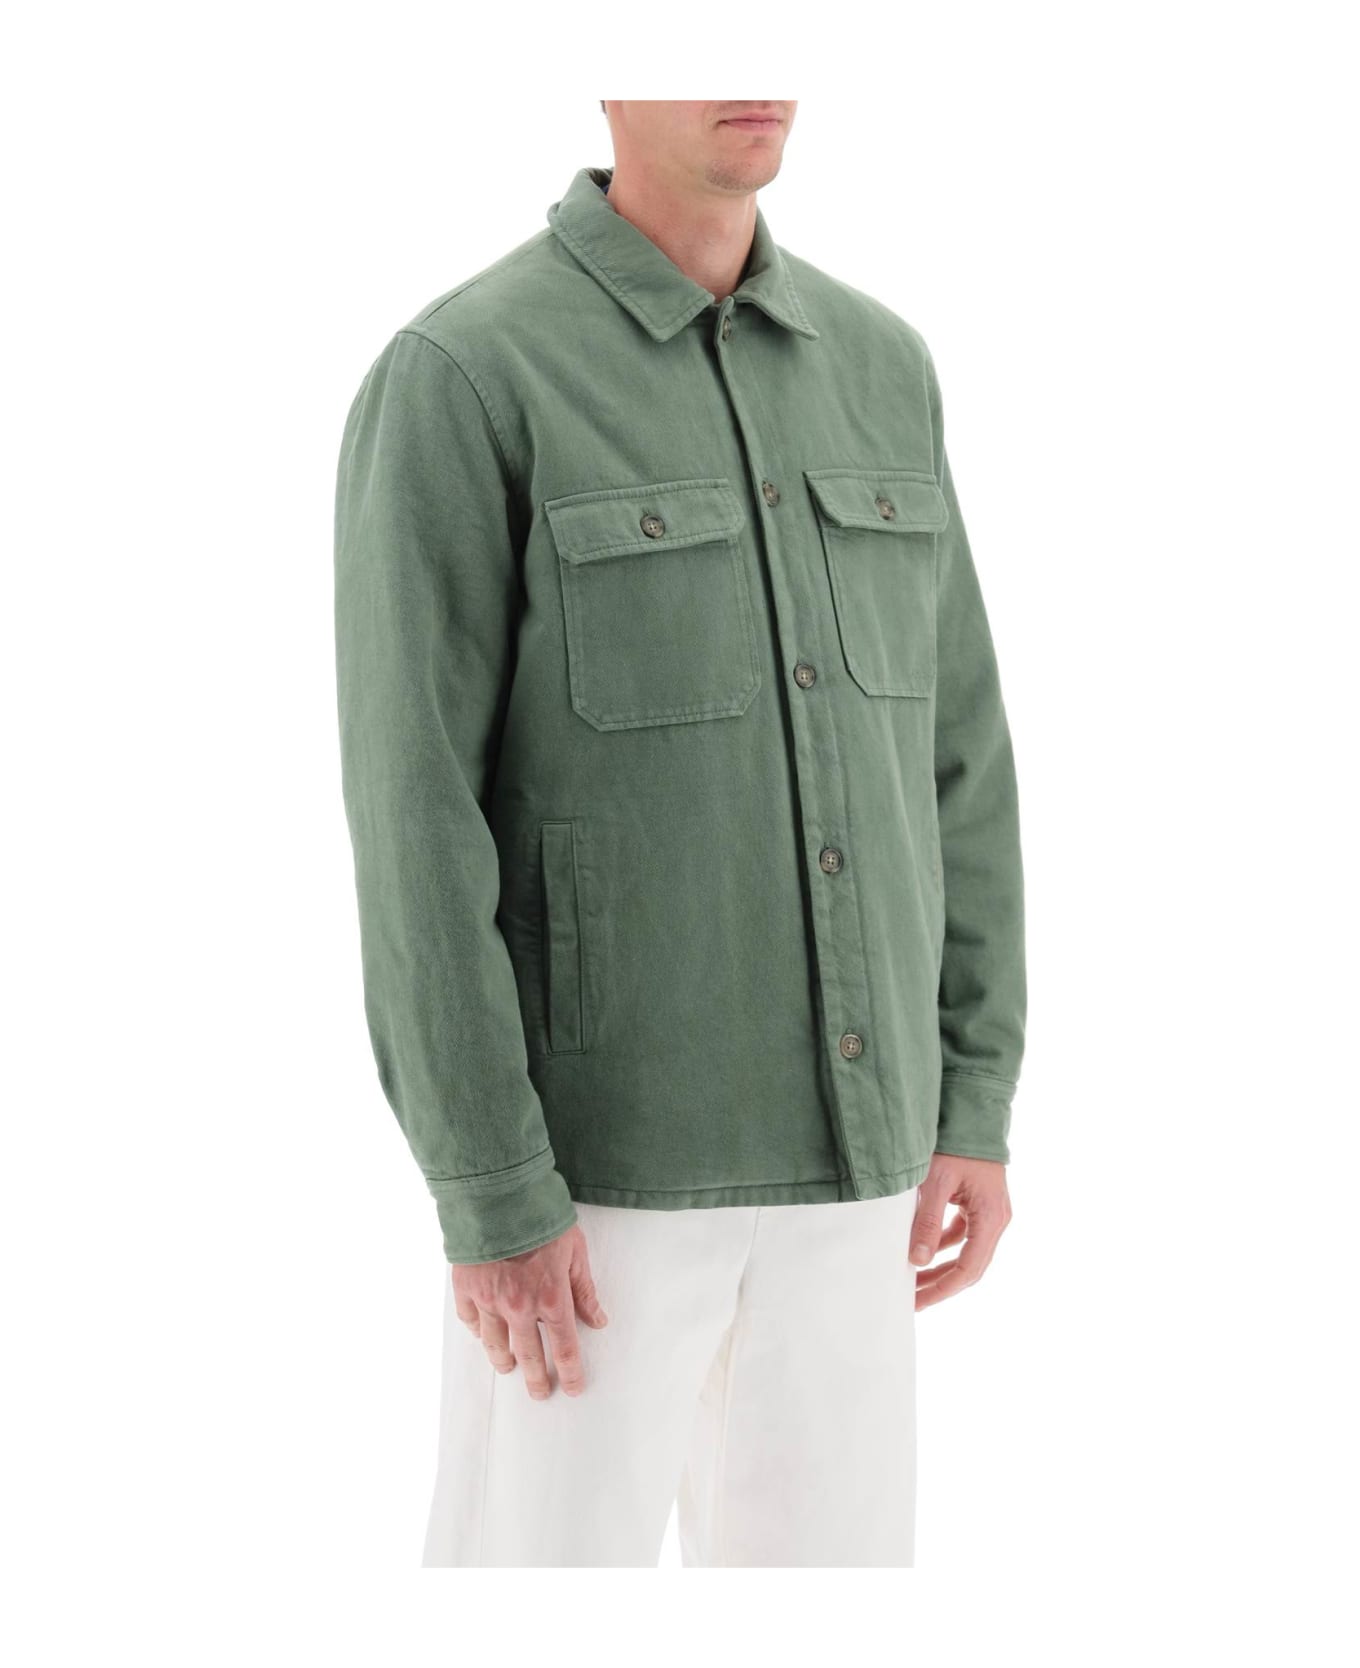 A.P.C. Alessio Padded Overshirt - FORET (Green) ジャケット